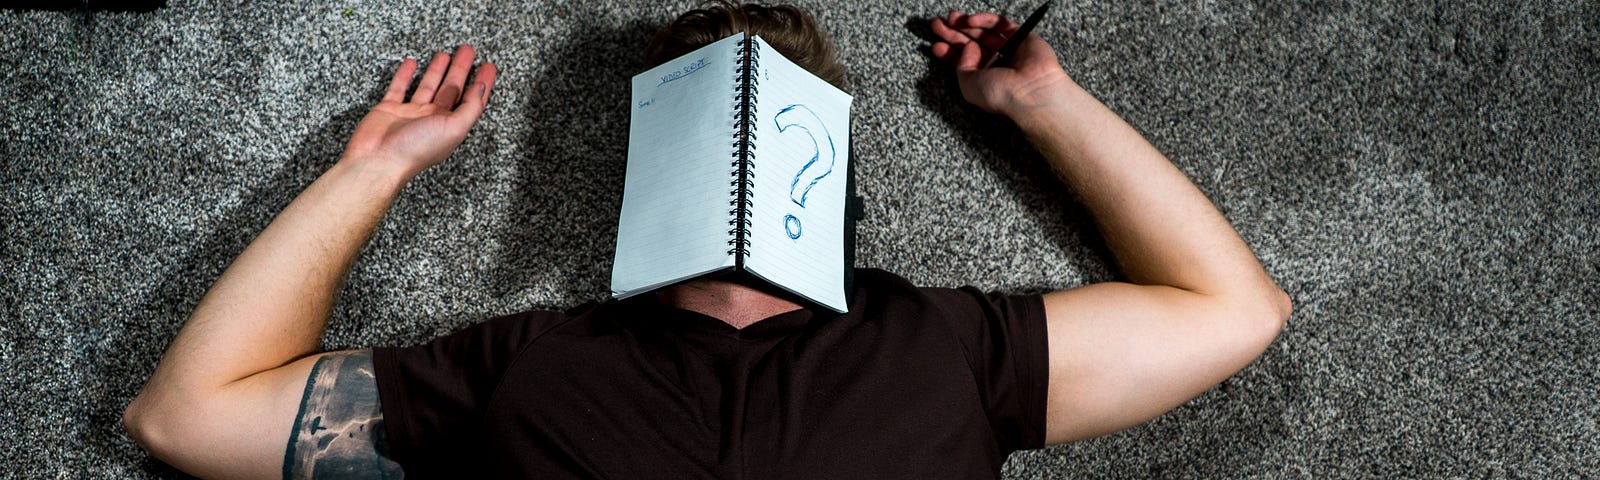 Man on floor with notebook on face. Notebook has question mark. Man clearly suffering from writer’s block.